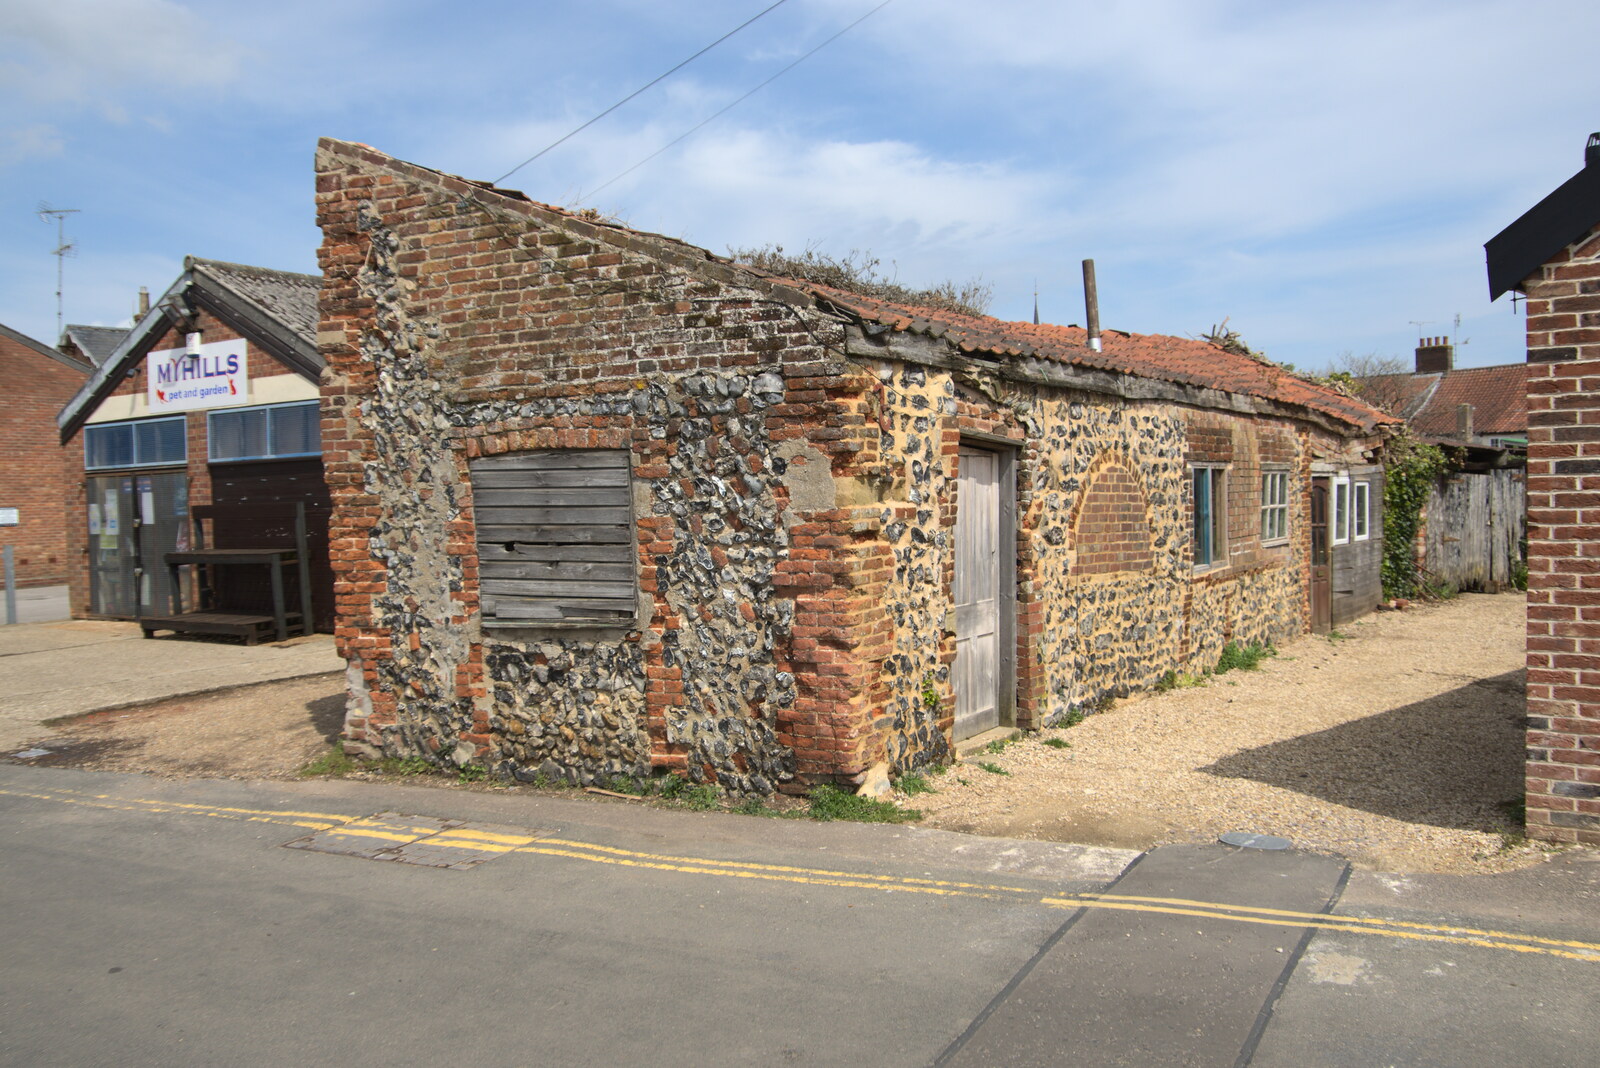 Brick and flint shed in Swaffham from A Vaccination Afternoon, Swaffham, Norfolk - 9th May 2021